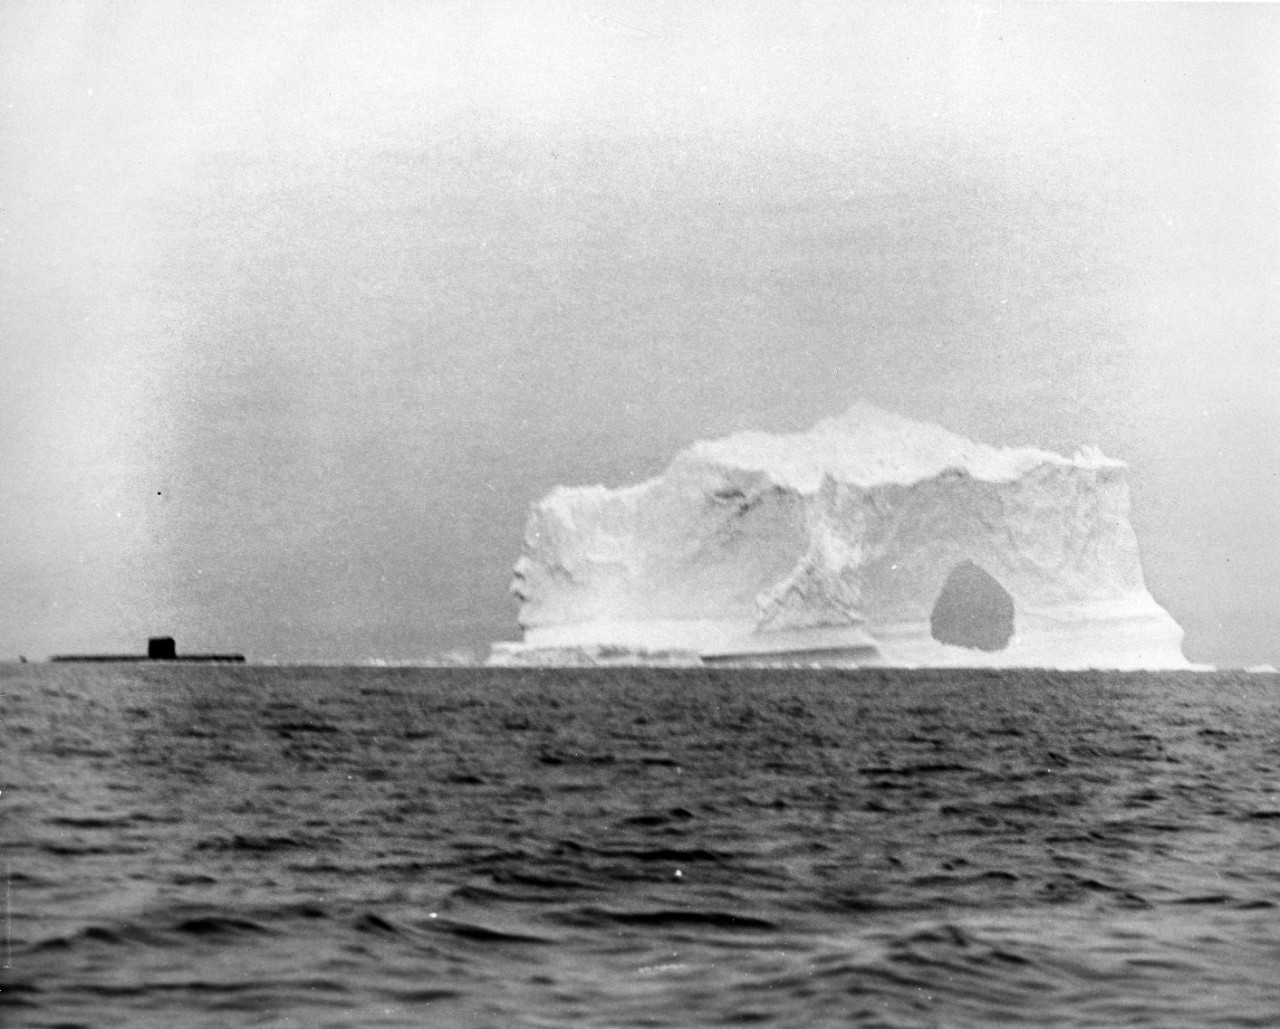 10 photographs of the SEADRAGON (SSN-584) on its first Arctic Cruise in the Fall of 1960. It was the first submarine to travel from the West to the East coast via the Northwest Passage and the first time photographs of the underside of ice formations had been taken. Donor: Admiral Robert L. DENNISON, USN (RET.), ACC # 79-003. Photos from the USN 1050047-1050057 series.